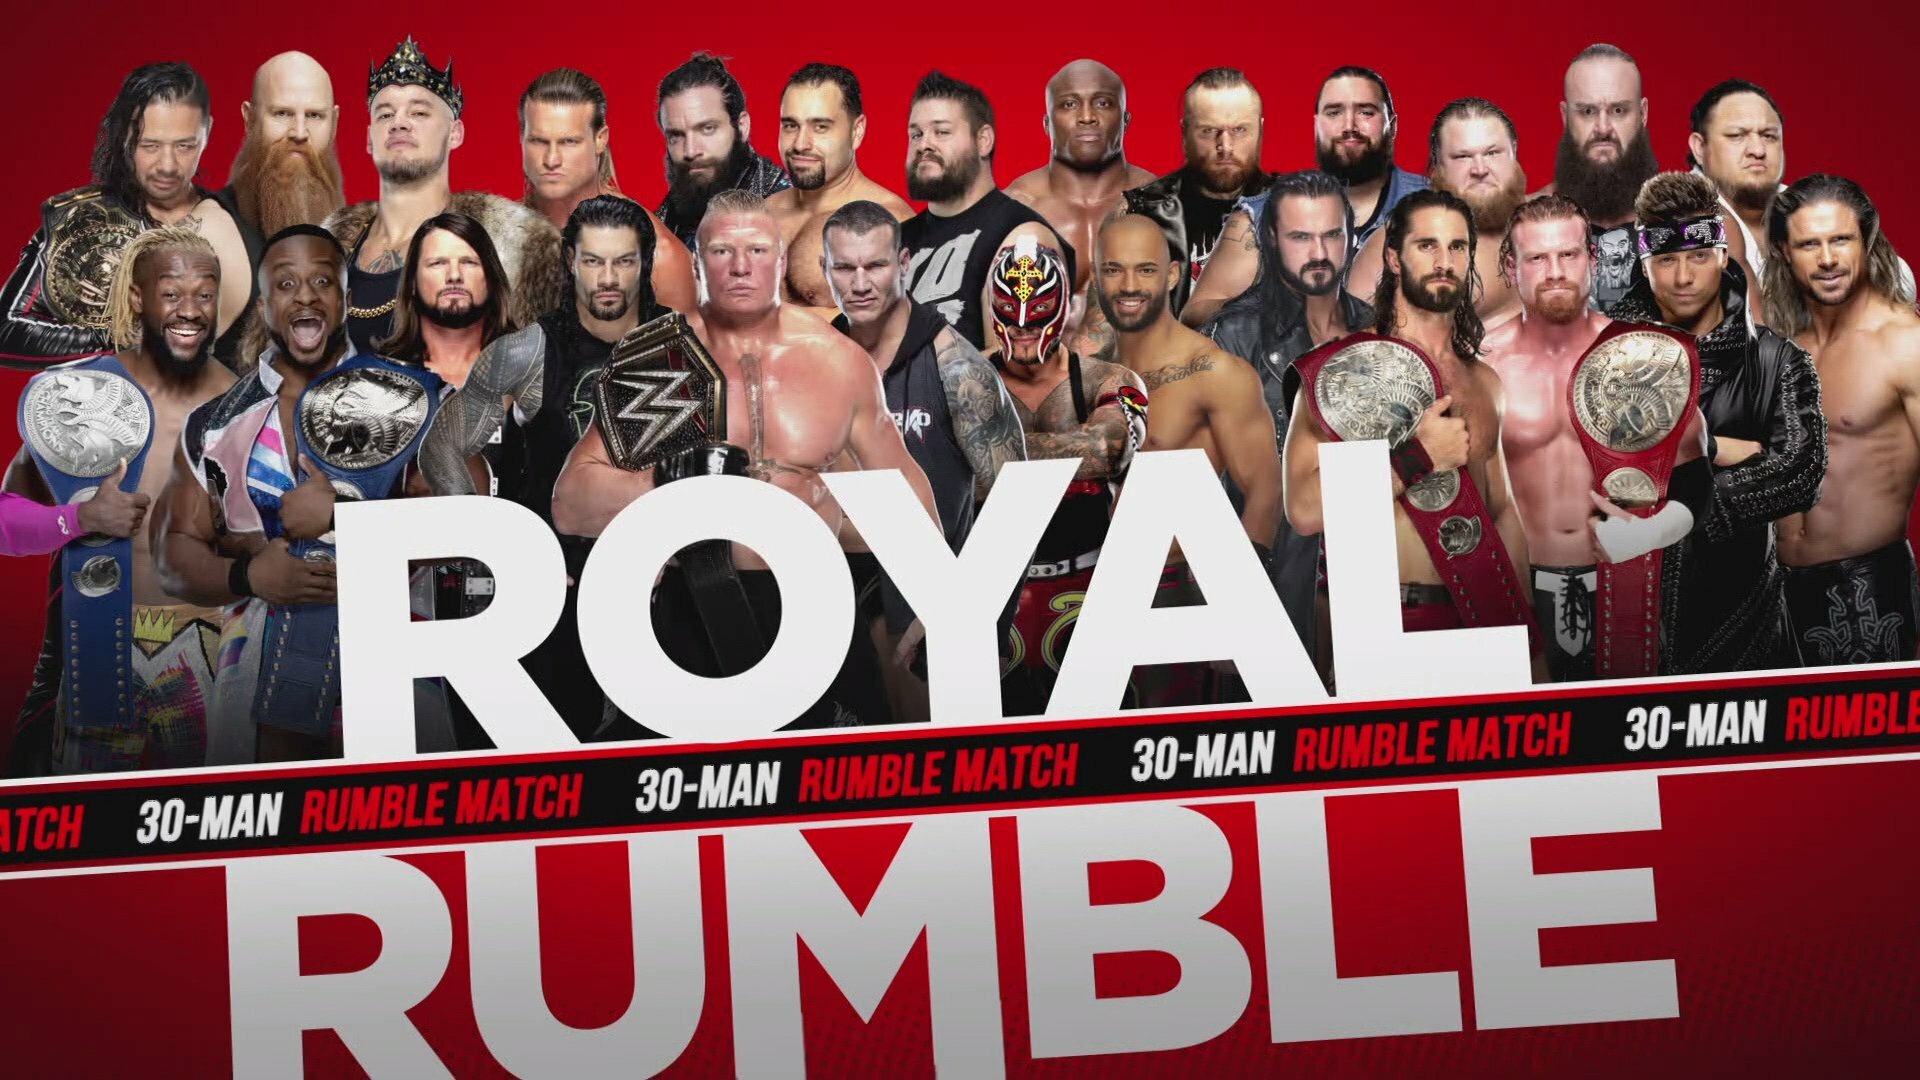 Royal Rumble Minute Maid Park In Houston Texas WWE PPV On WWE Network TVmaze